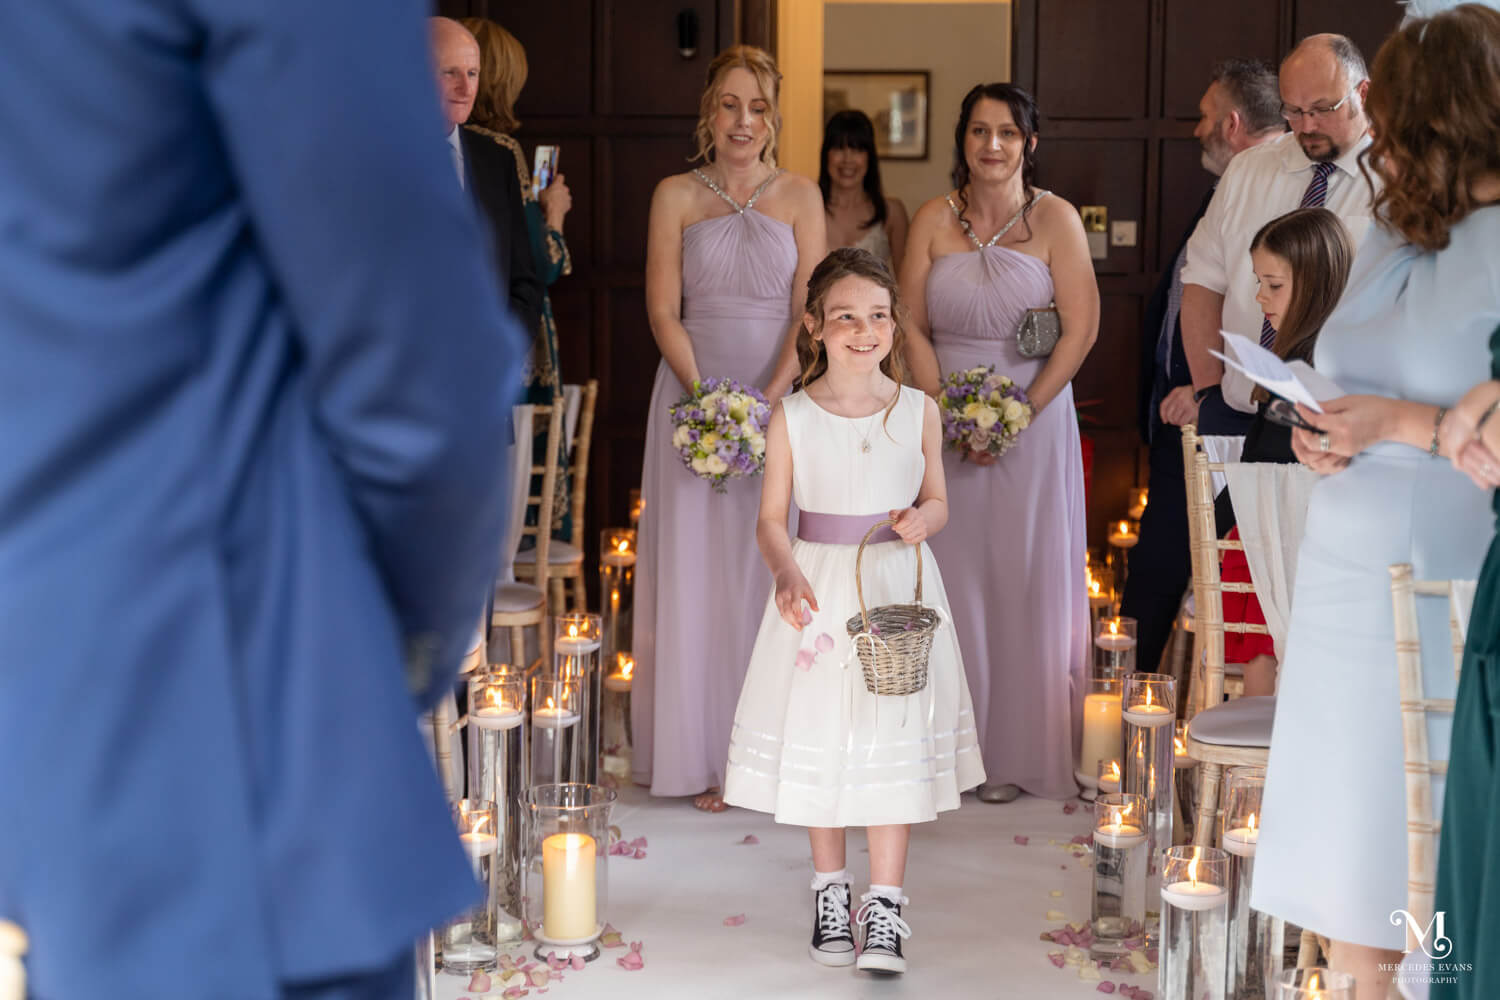 the flower girl scatters petals and the bridesmaids walk behind her